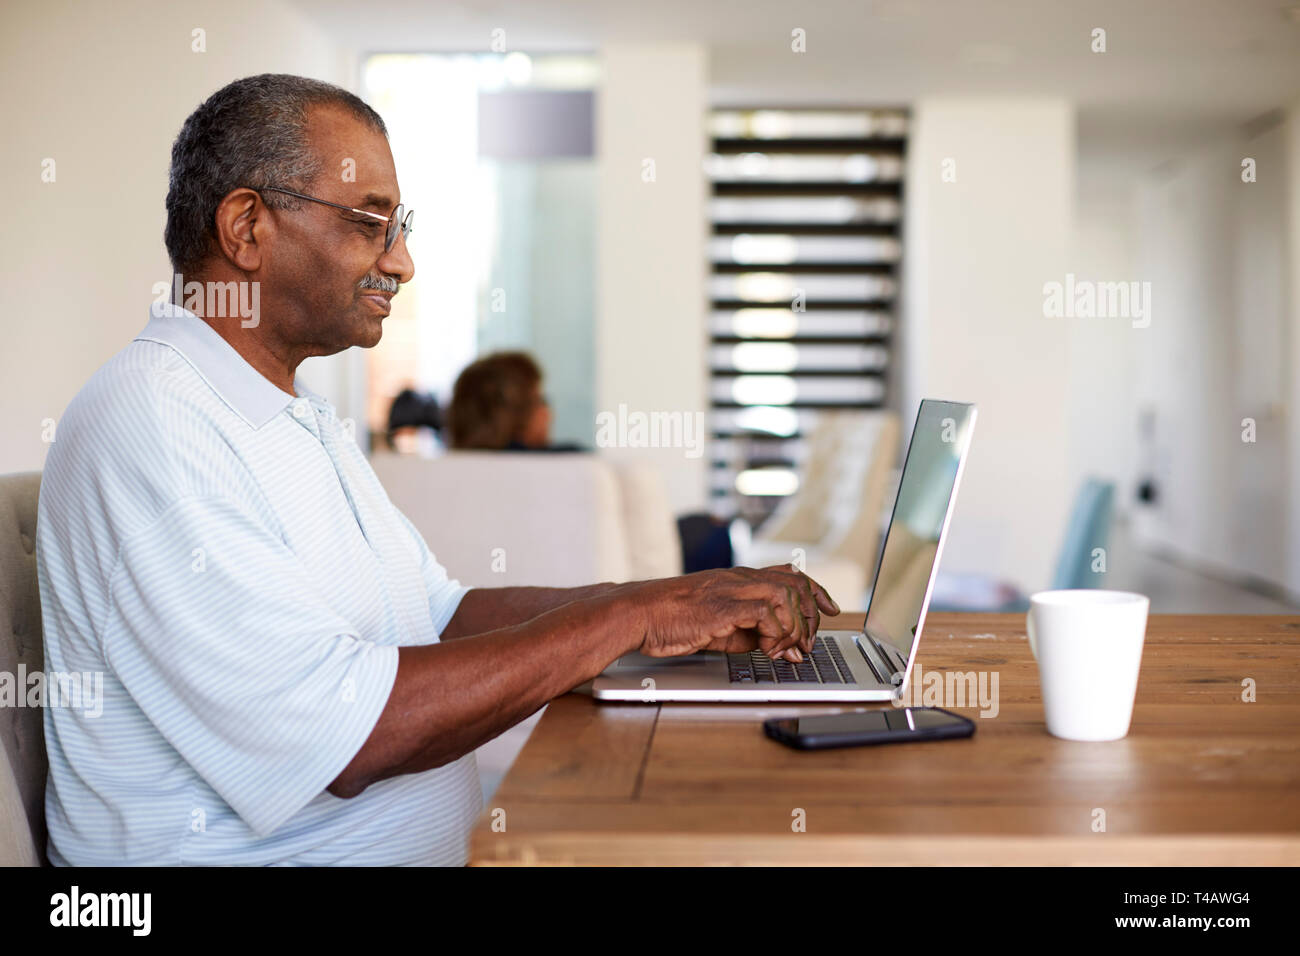 Senior black man sitting at the table using a laptop computer at home, side view Stock Photo